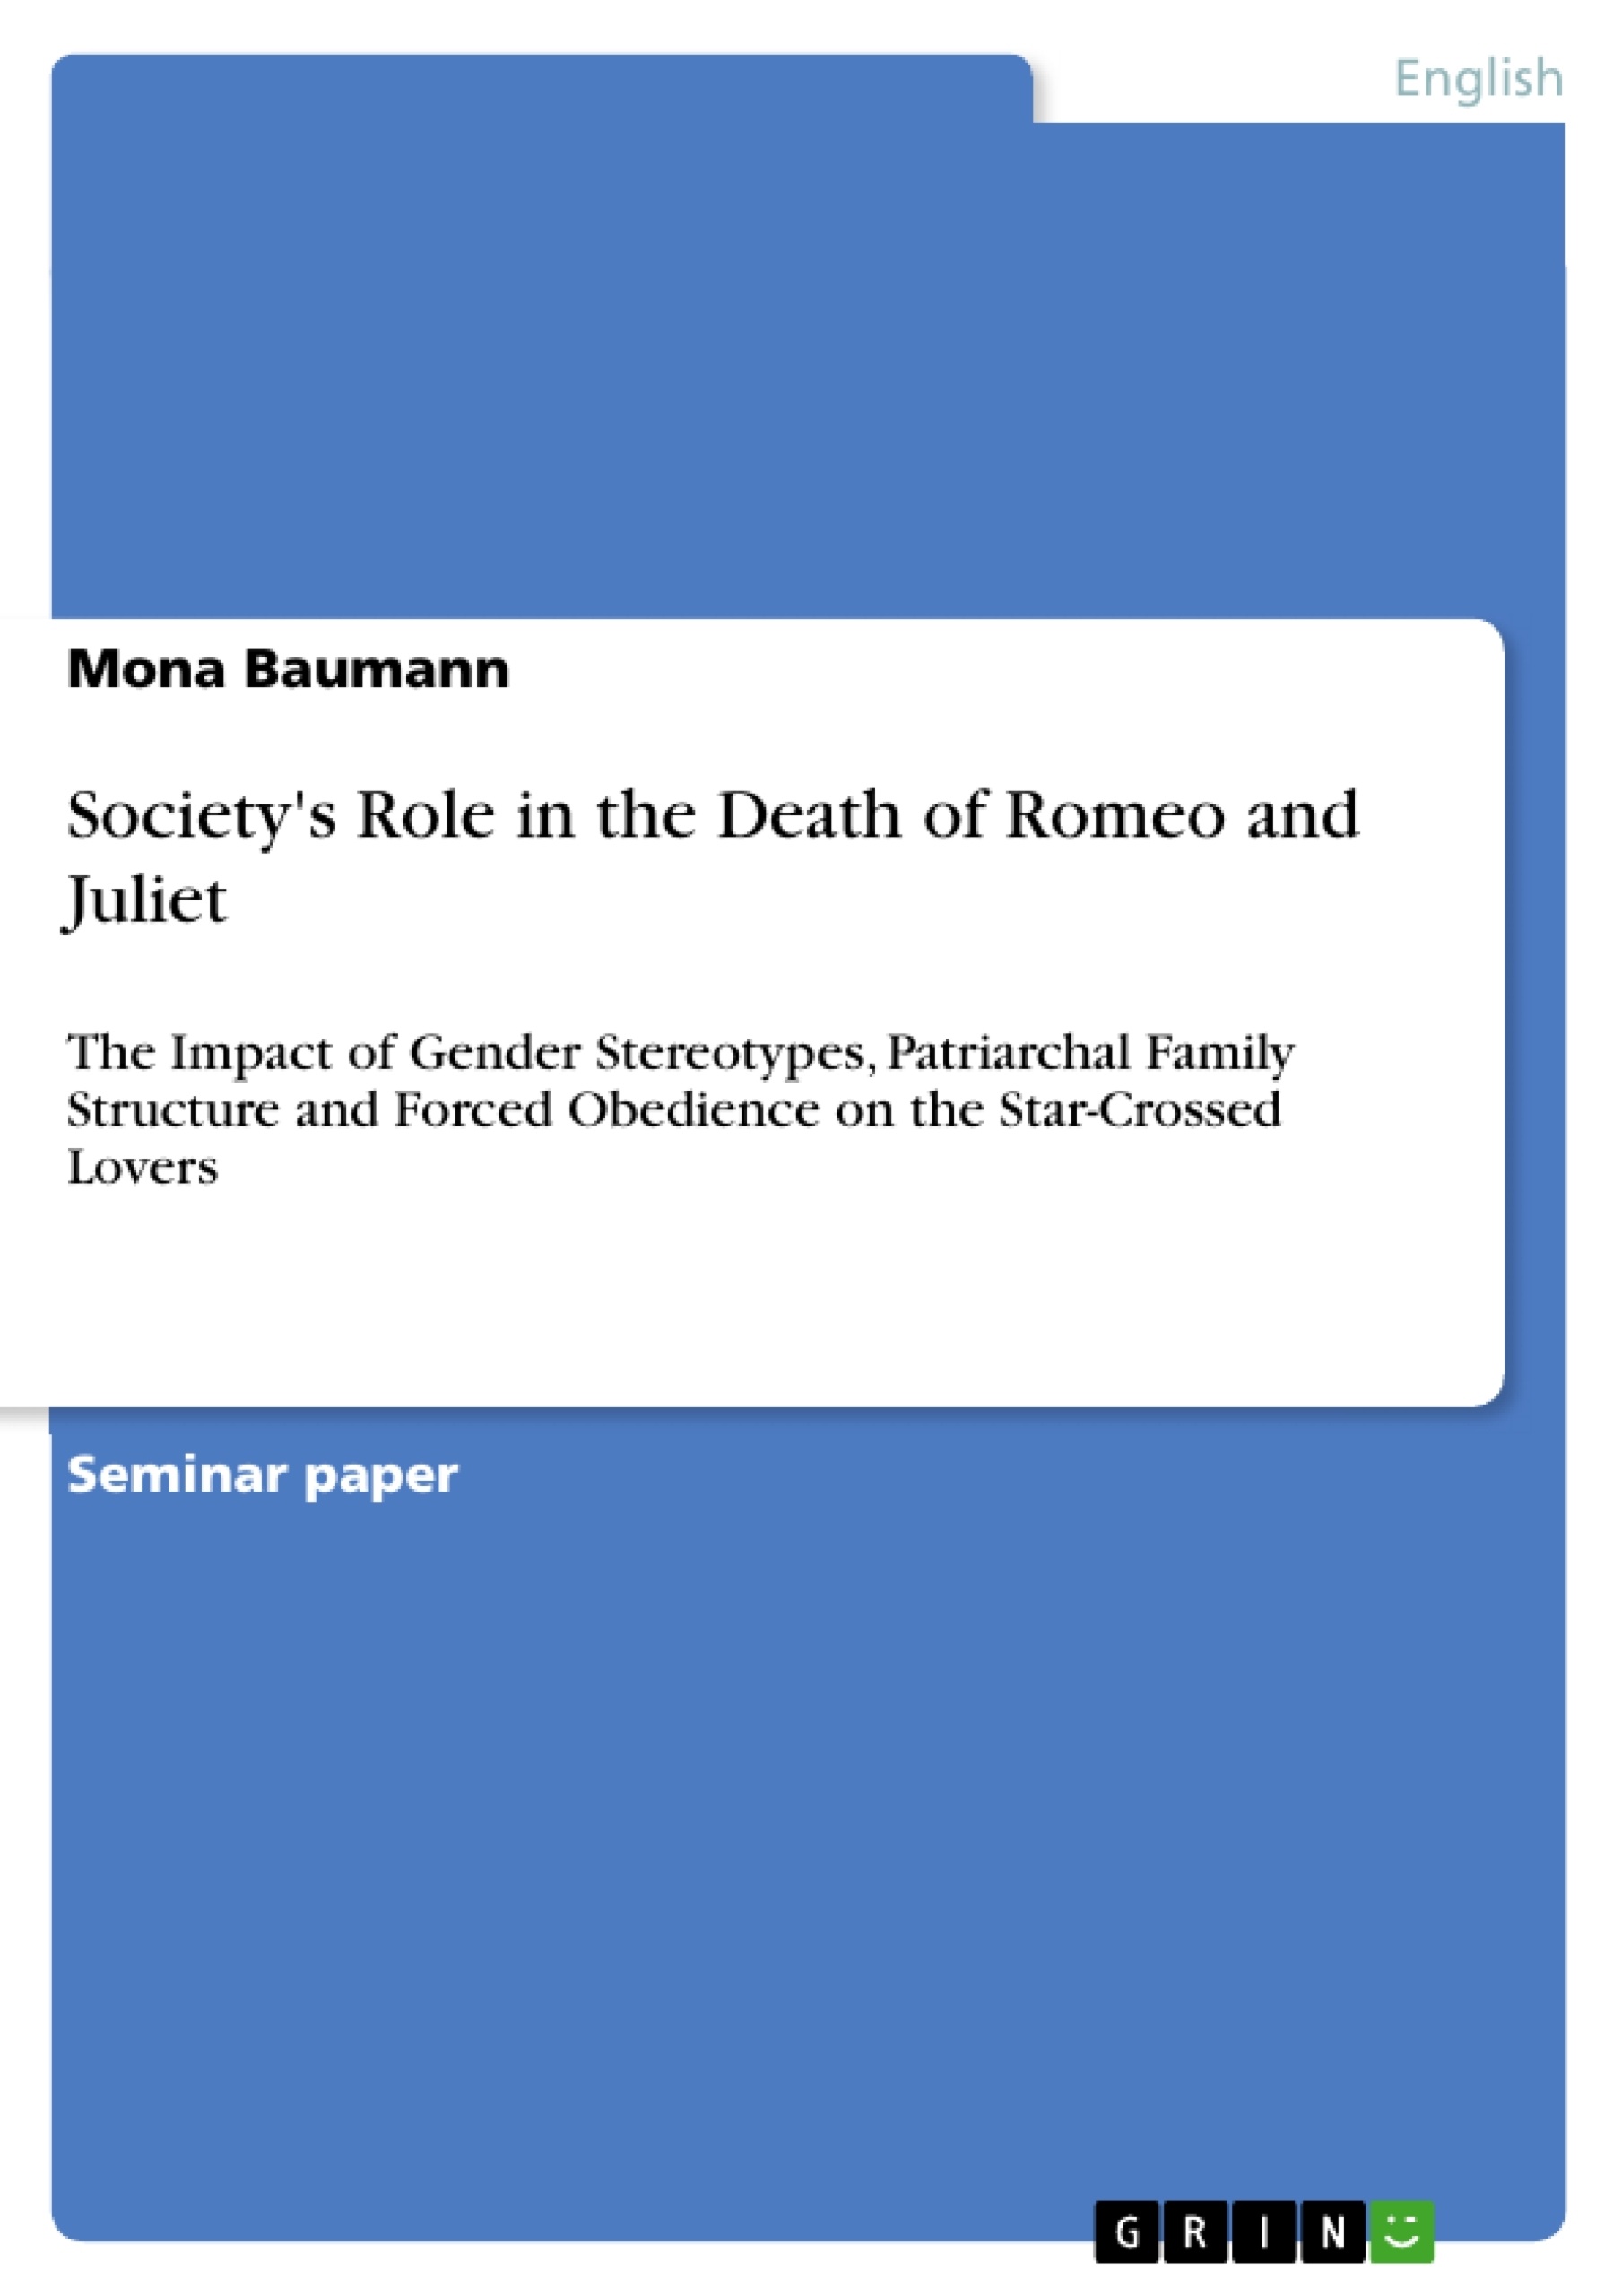 Title: Society's Role in the Death of Romeo and Juliet